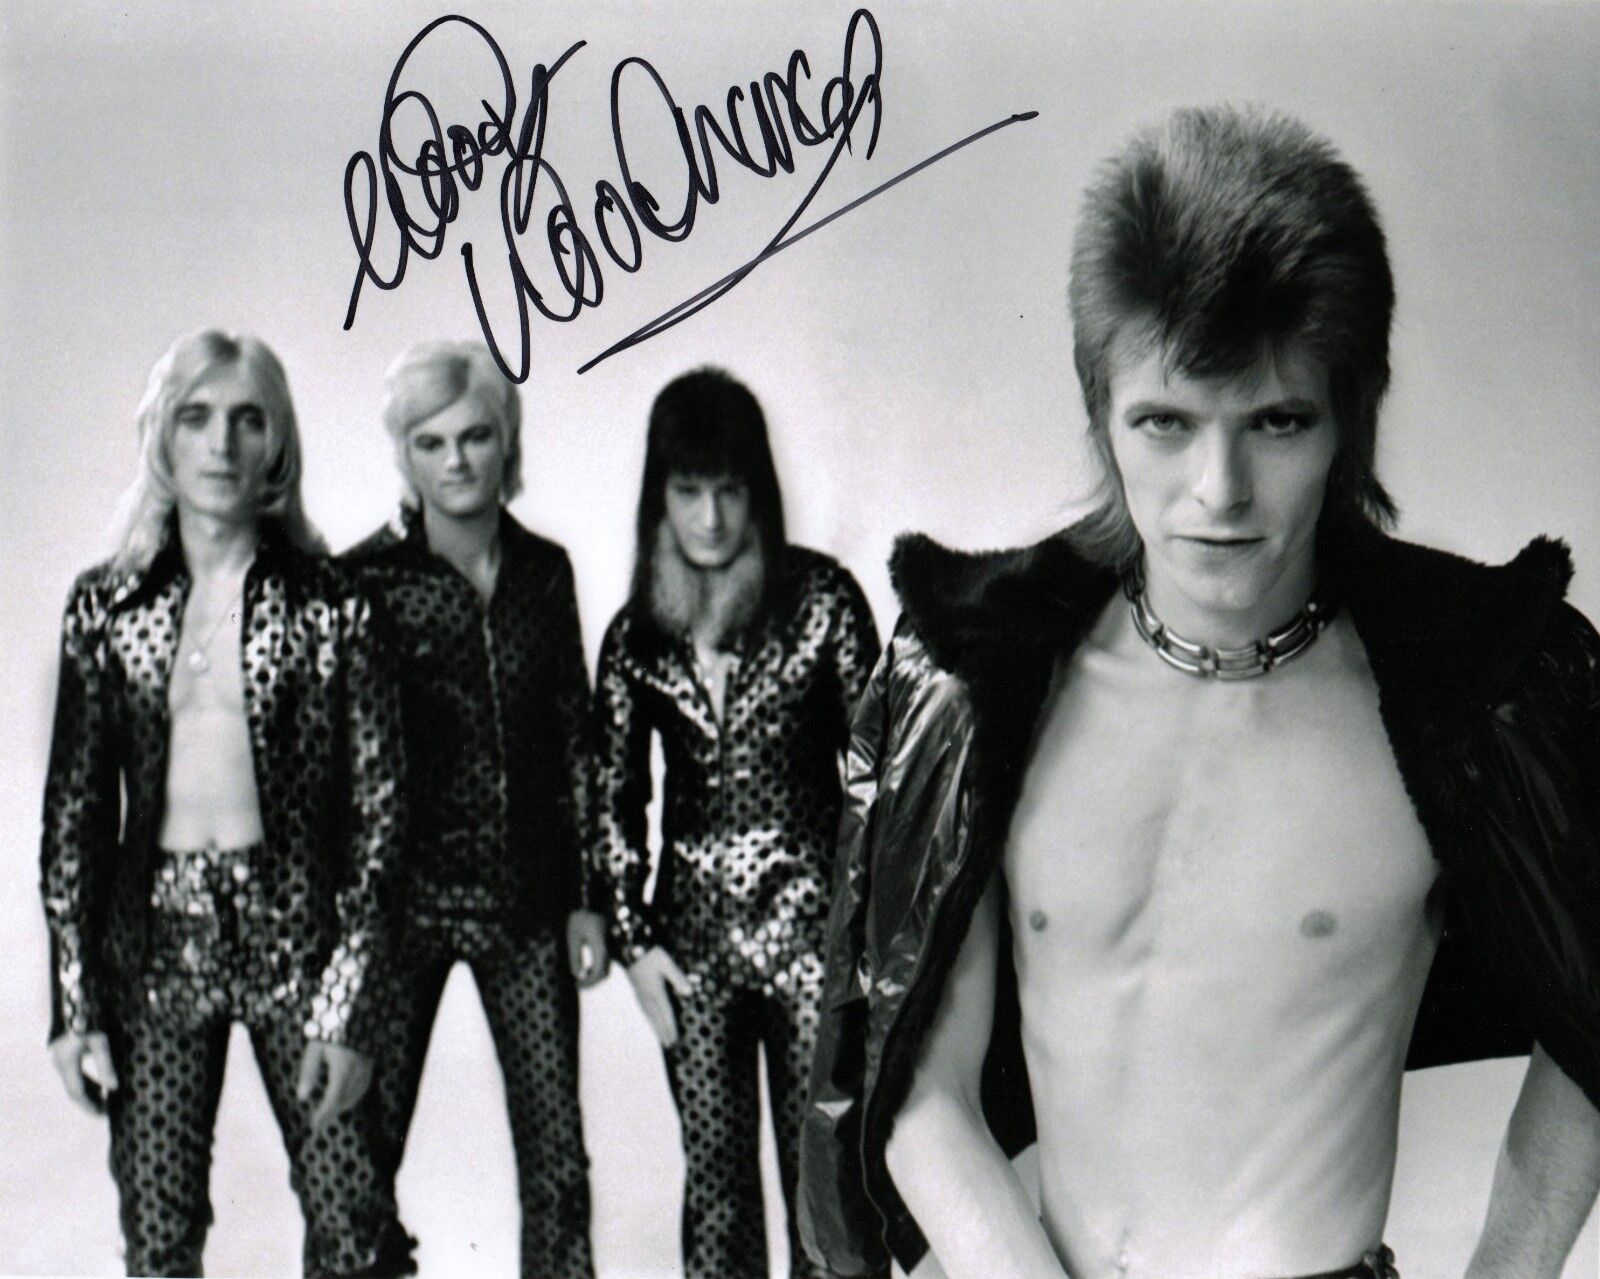 Mick Woodmansey of David Bowie The Spiders from Mars hand SIGNED Photo Poster painting #2 COA